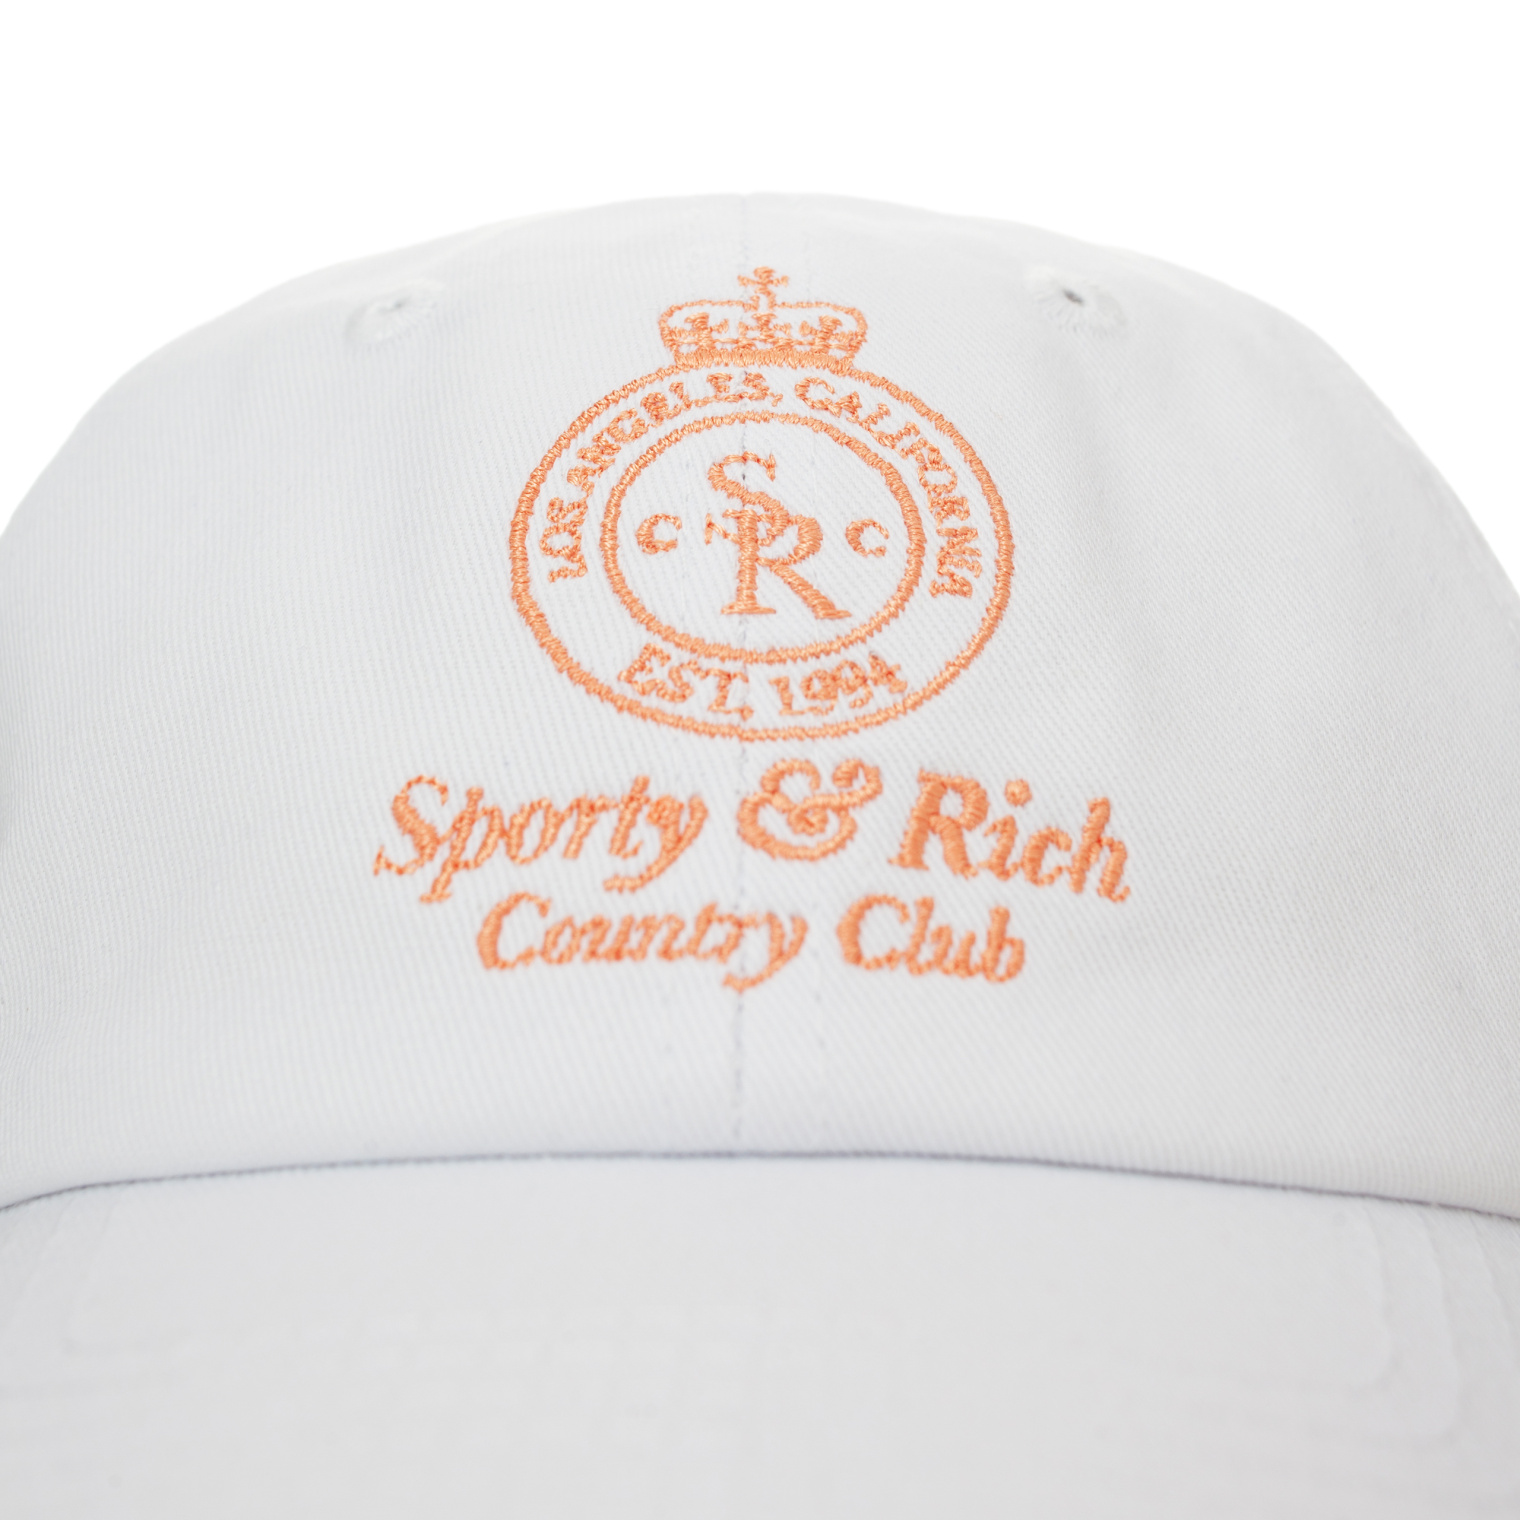 SPORTY & RICH Кепка с вышивкой Country Club